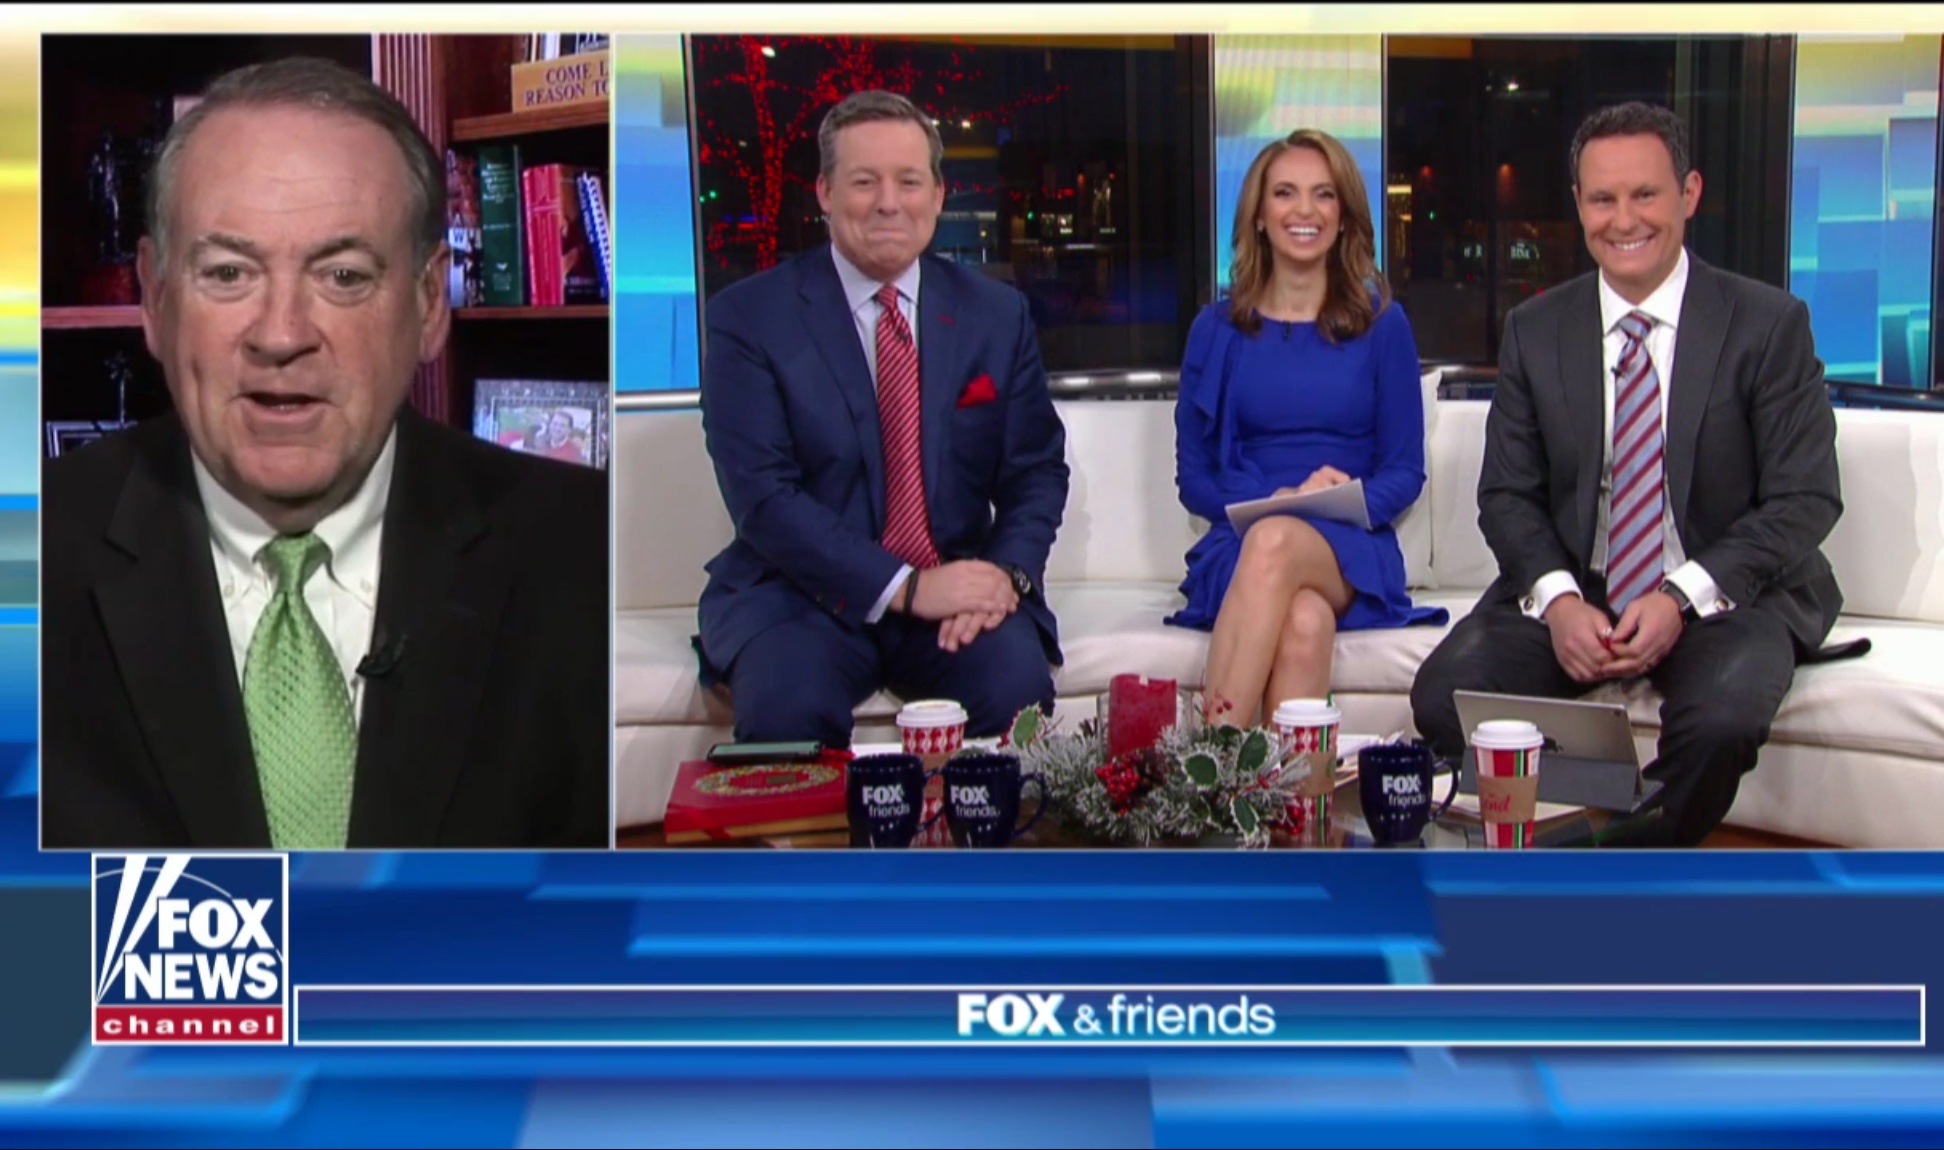 Former Gov. Mike Huckabee discusses funding the wall with Fox & Friends, Dec. 20, 2018. Fox News screenshot.